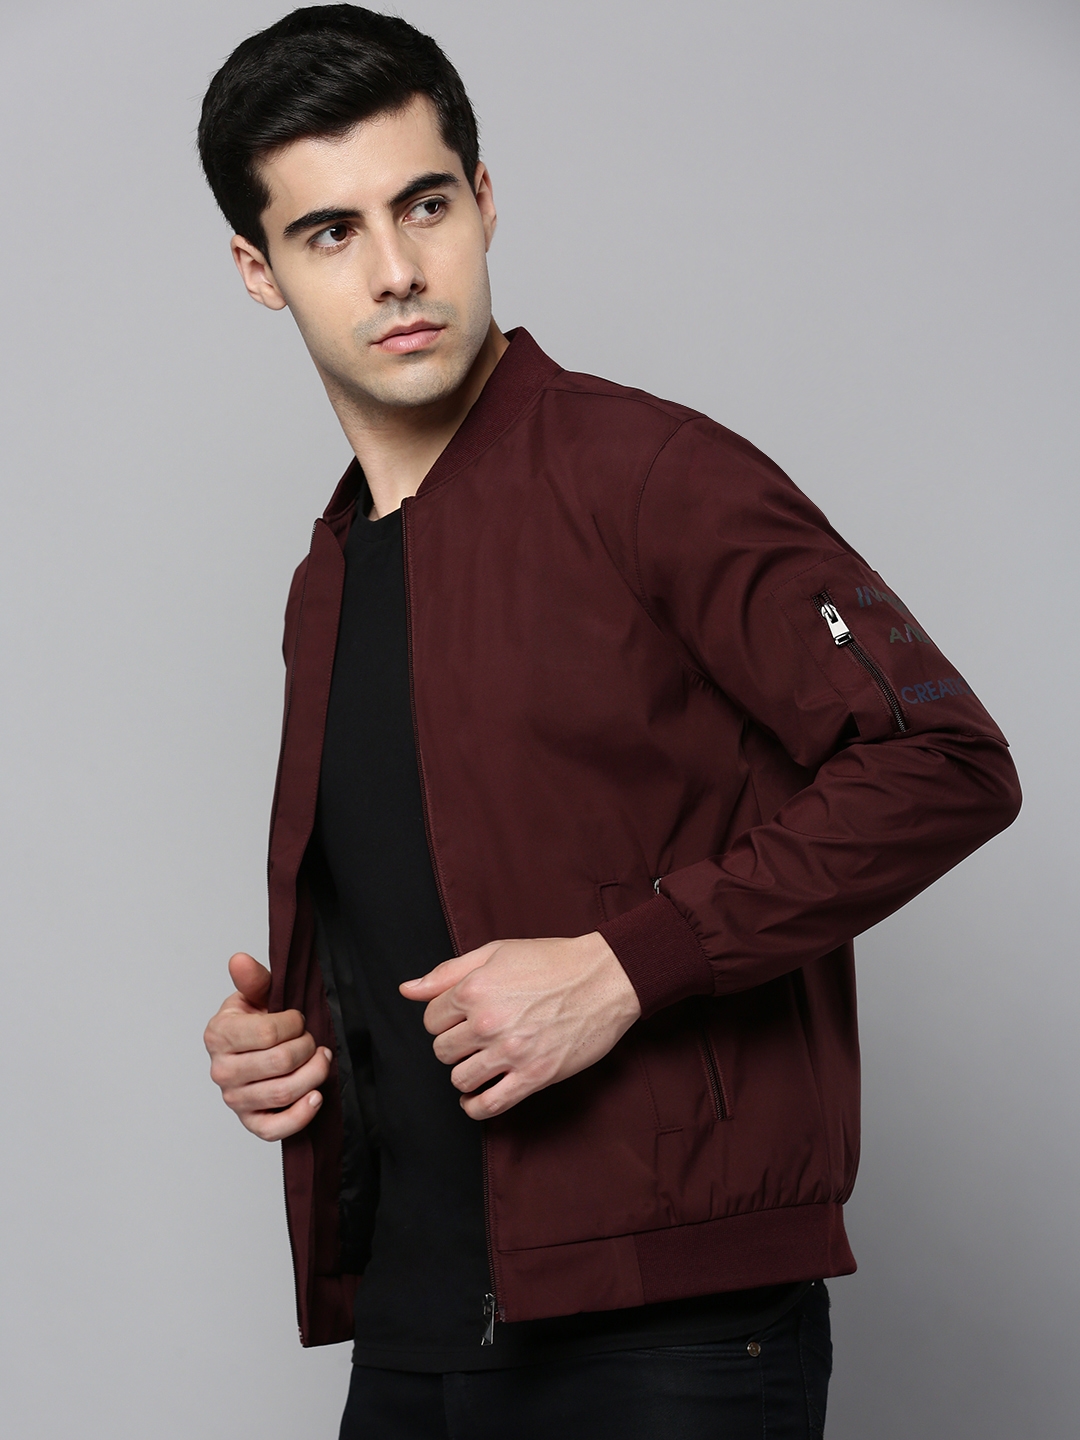 Men's Red Polyester Solid Bomber Jackets